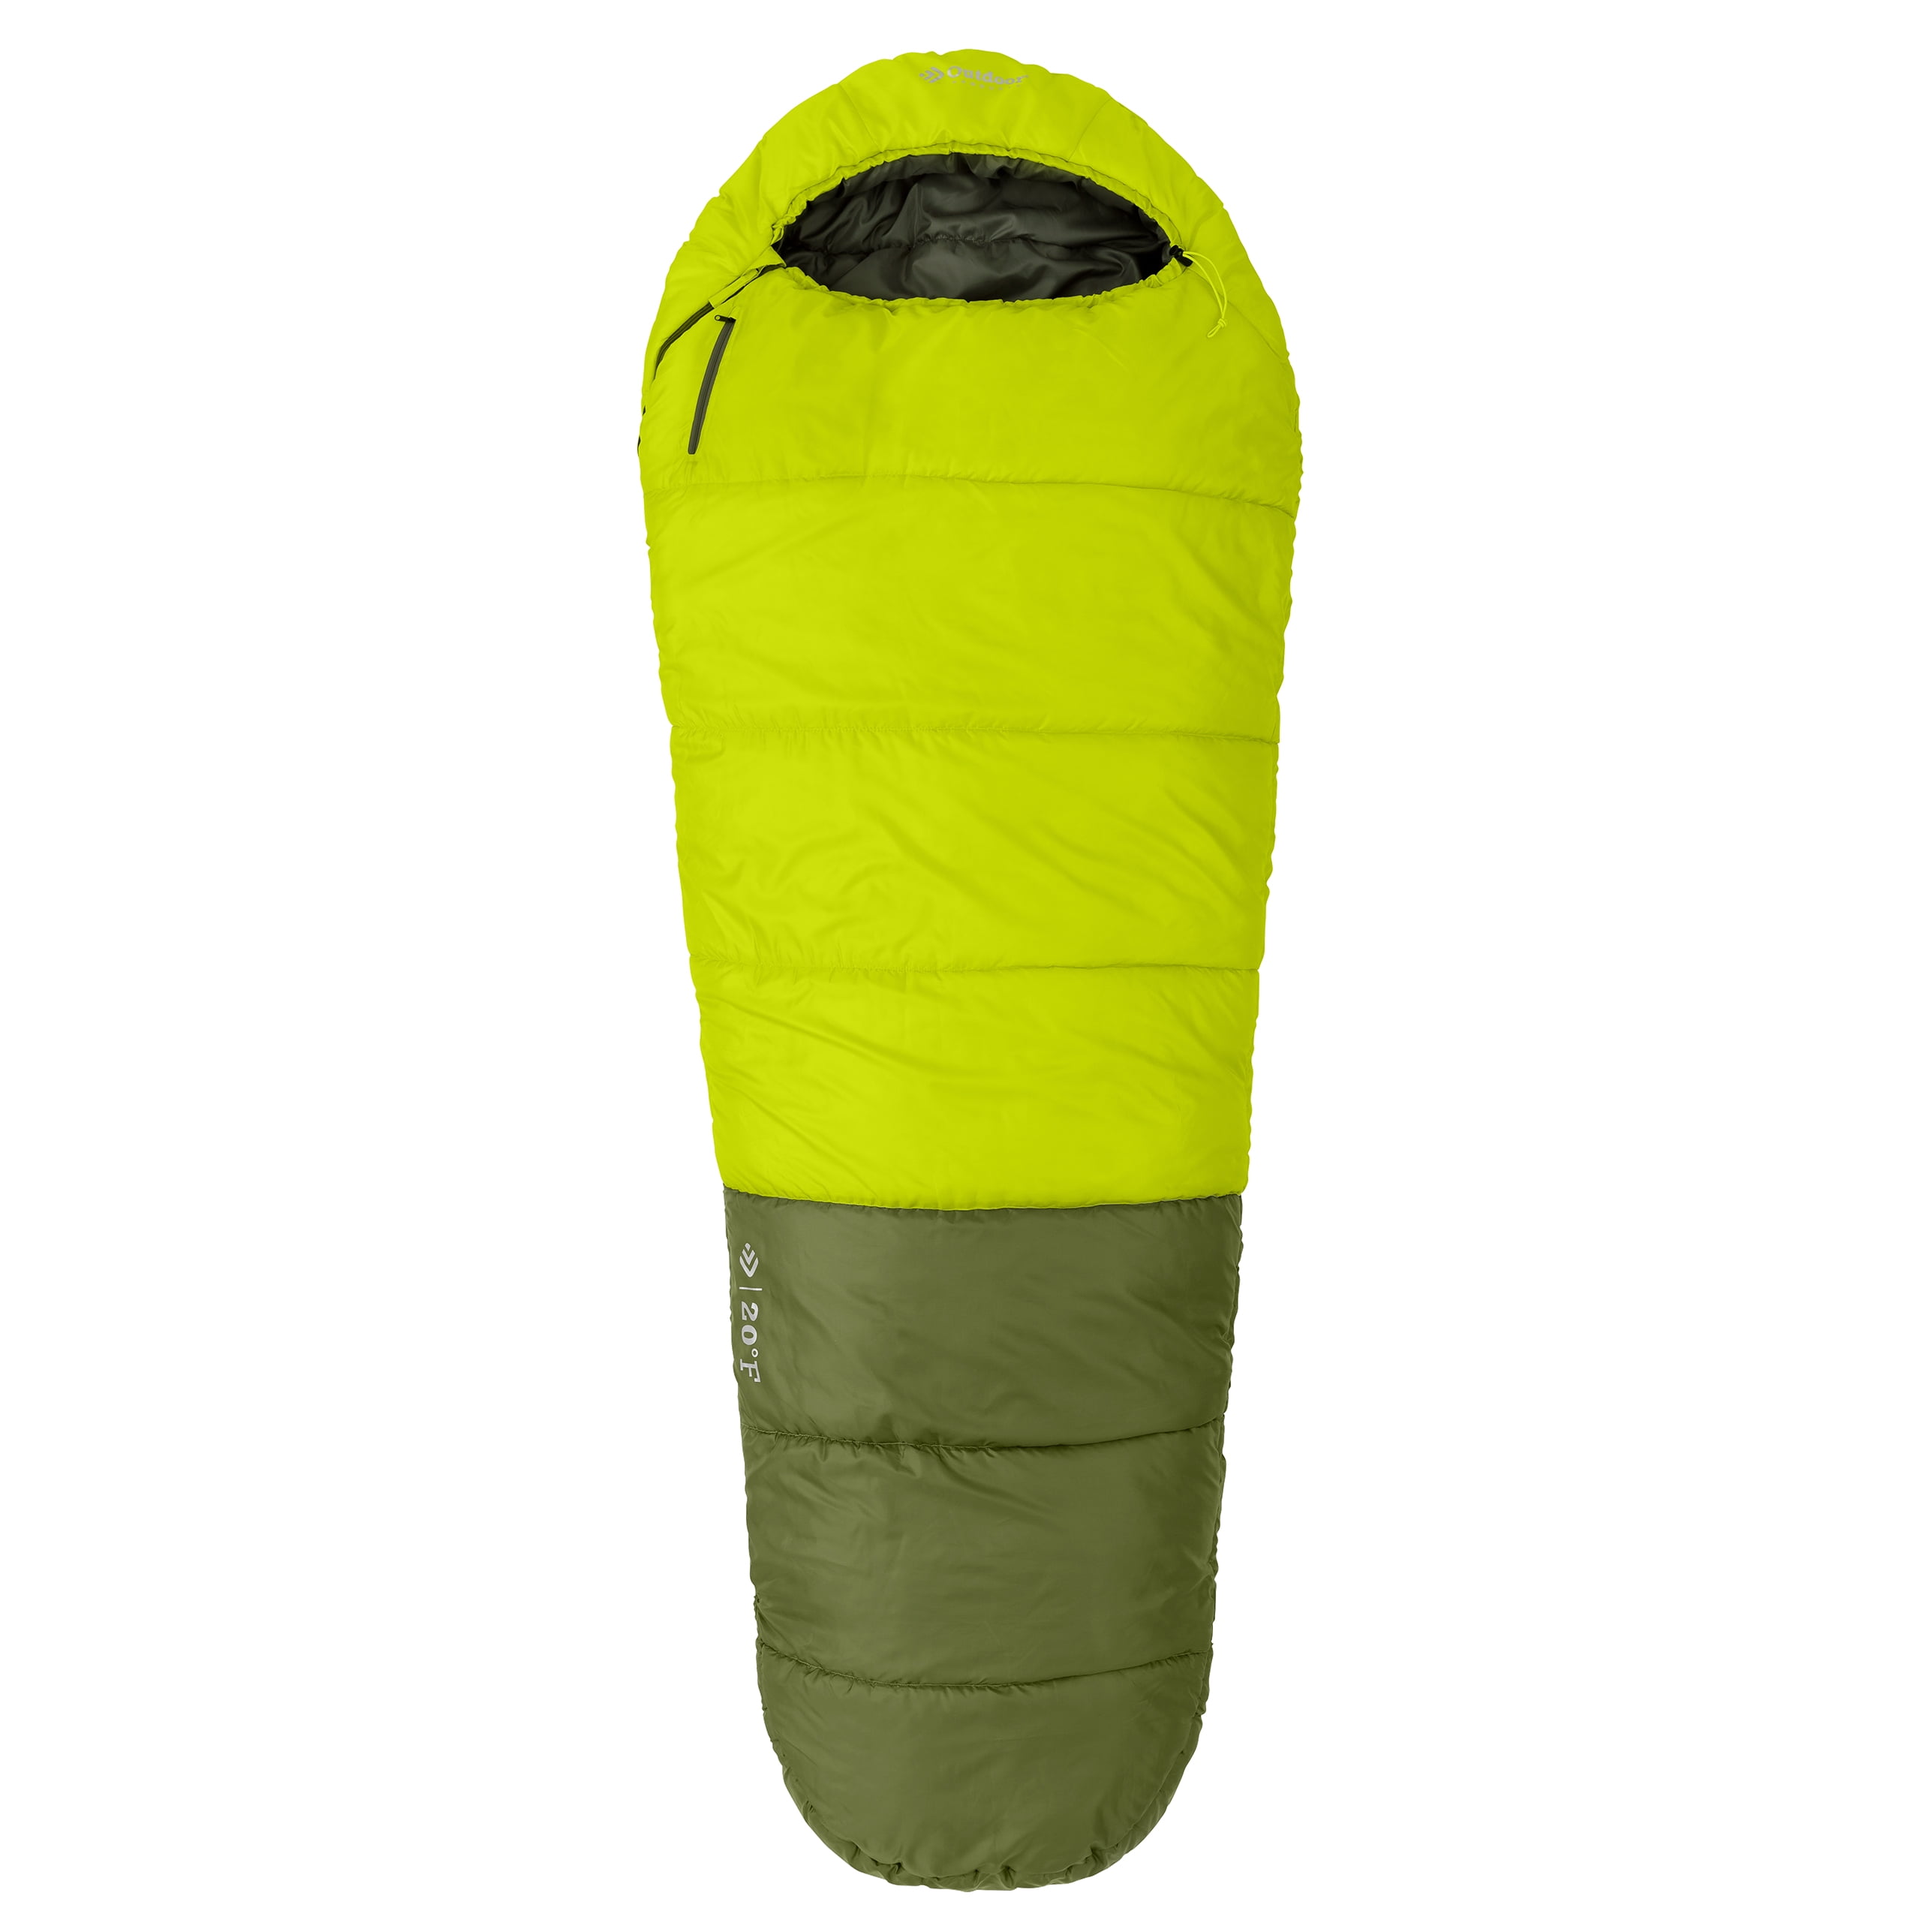 Columbia Outdoor Camping Adult Mummy Sleeping Bag 40 Degree 33" x 85" Blue New 